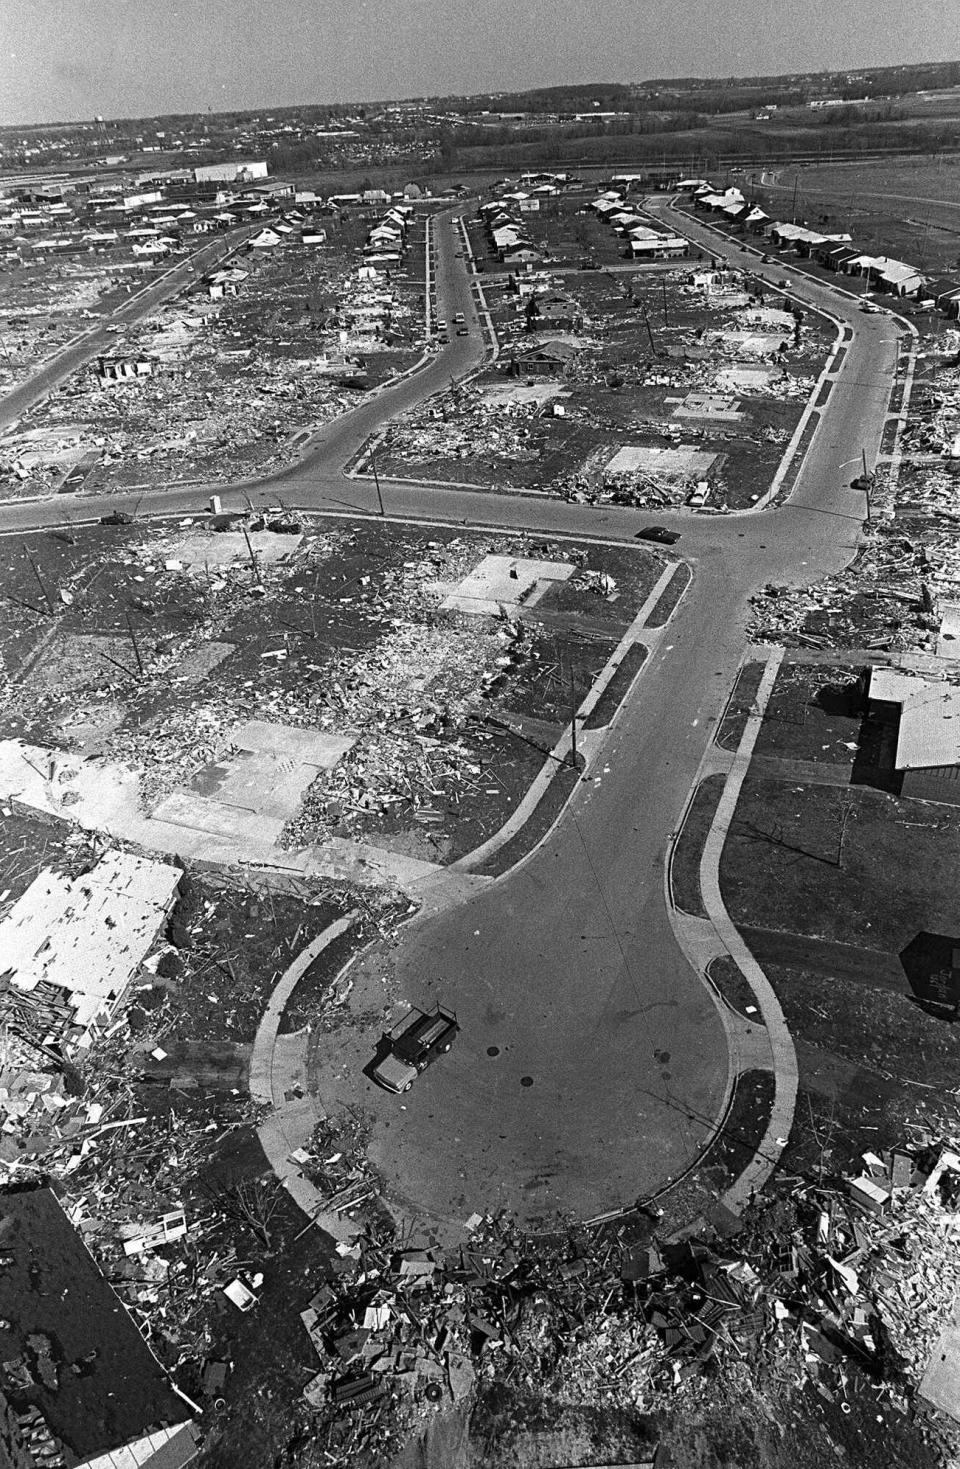 FILE - Xenia, Ohio, appears in this aerial photo of April 18, 1974, following the tornado of April 3. The section is known as the Arrowhead area of Xenia: where the tornado first touched down. The deadly tornado killed 32 people, injured hundreds and leveled half the city of 25,000. Nearby Wilberforce was also hit hard. As the Watergate scandal unfolded in Washington, President Richard Nixon made an unannounced visit to Xenia to tour the damage. Xenia's was the deadliest and most powerful tornado of the 1974 Super Outbreak. (AP Photo/Steve Pyle)